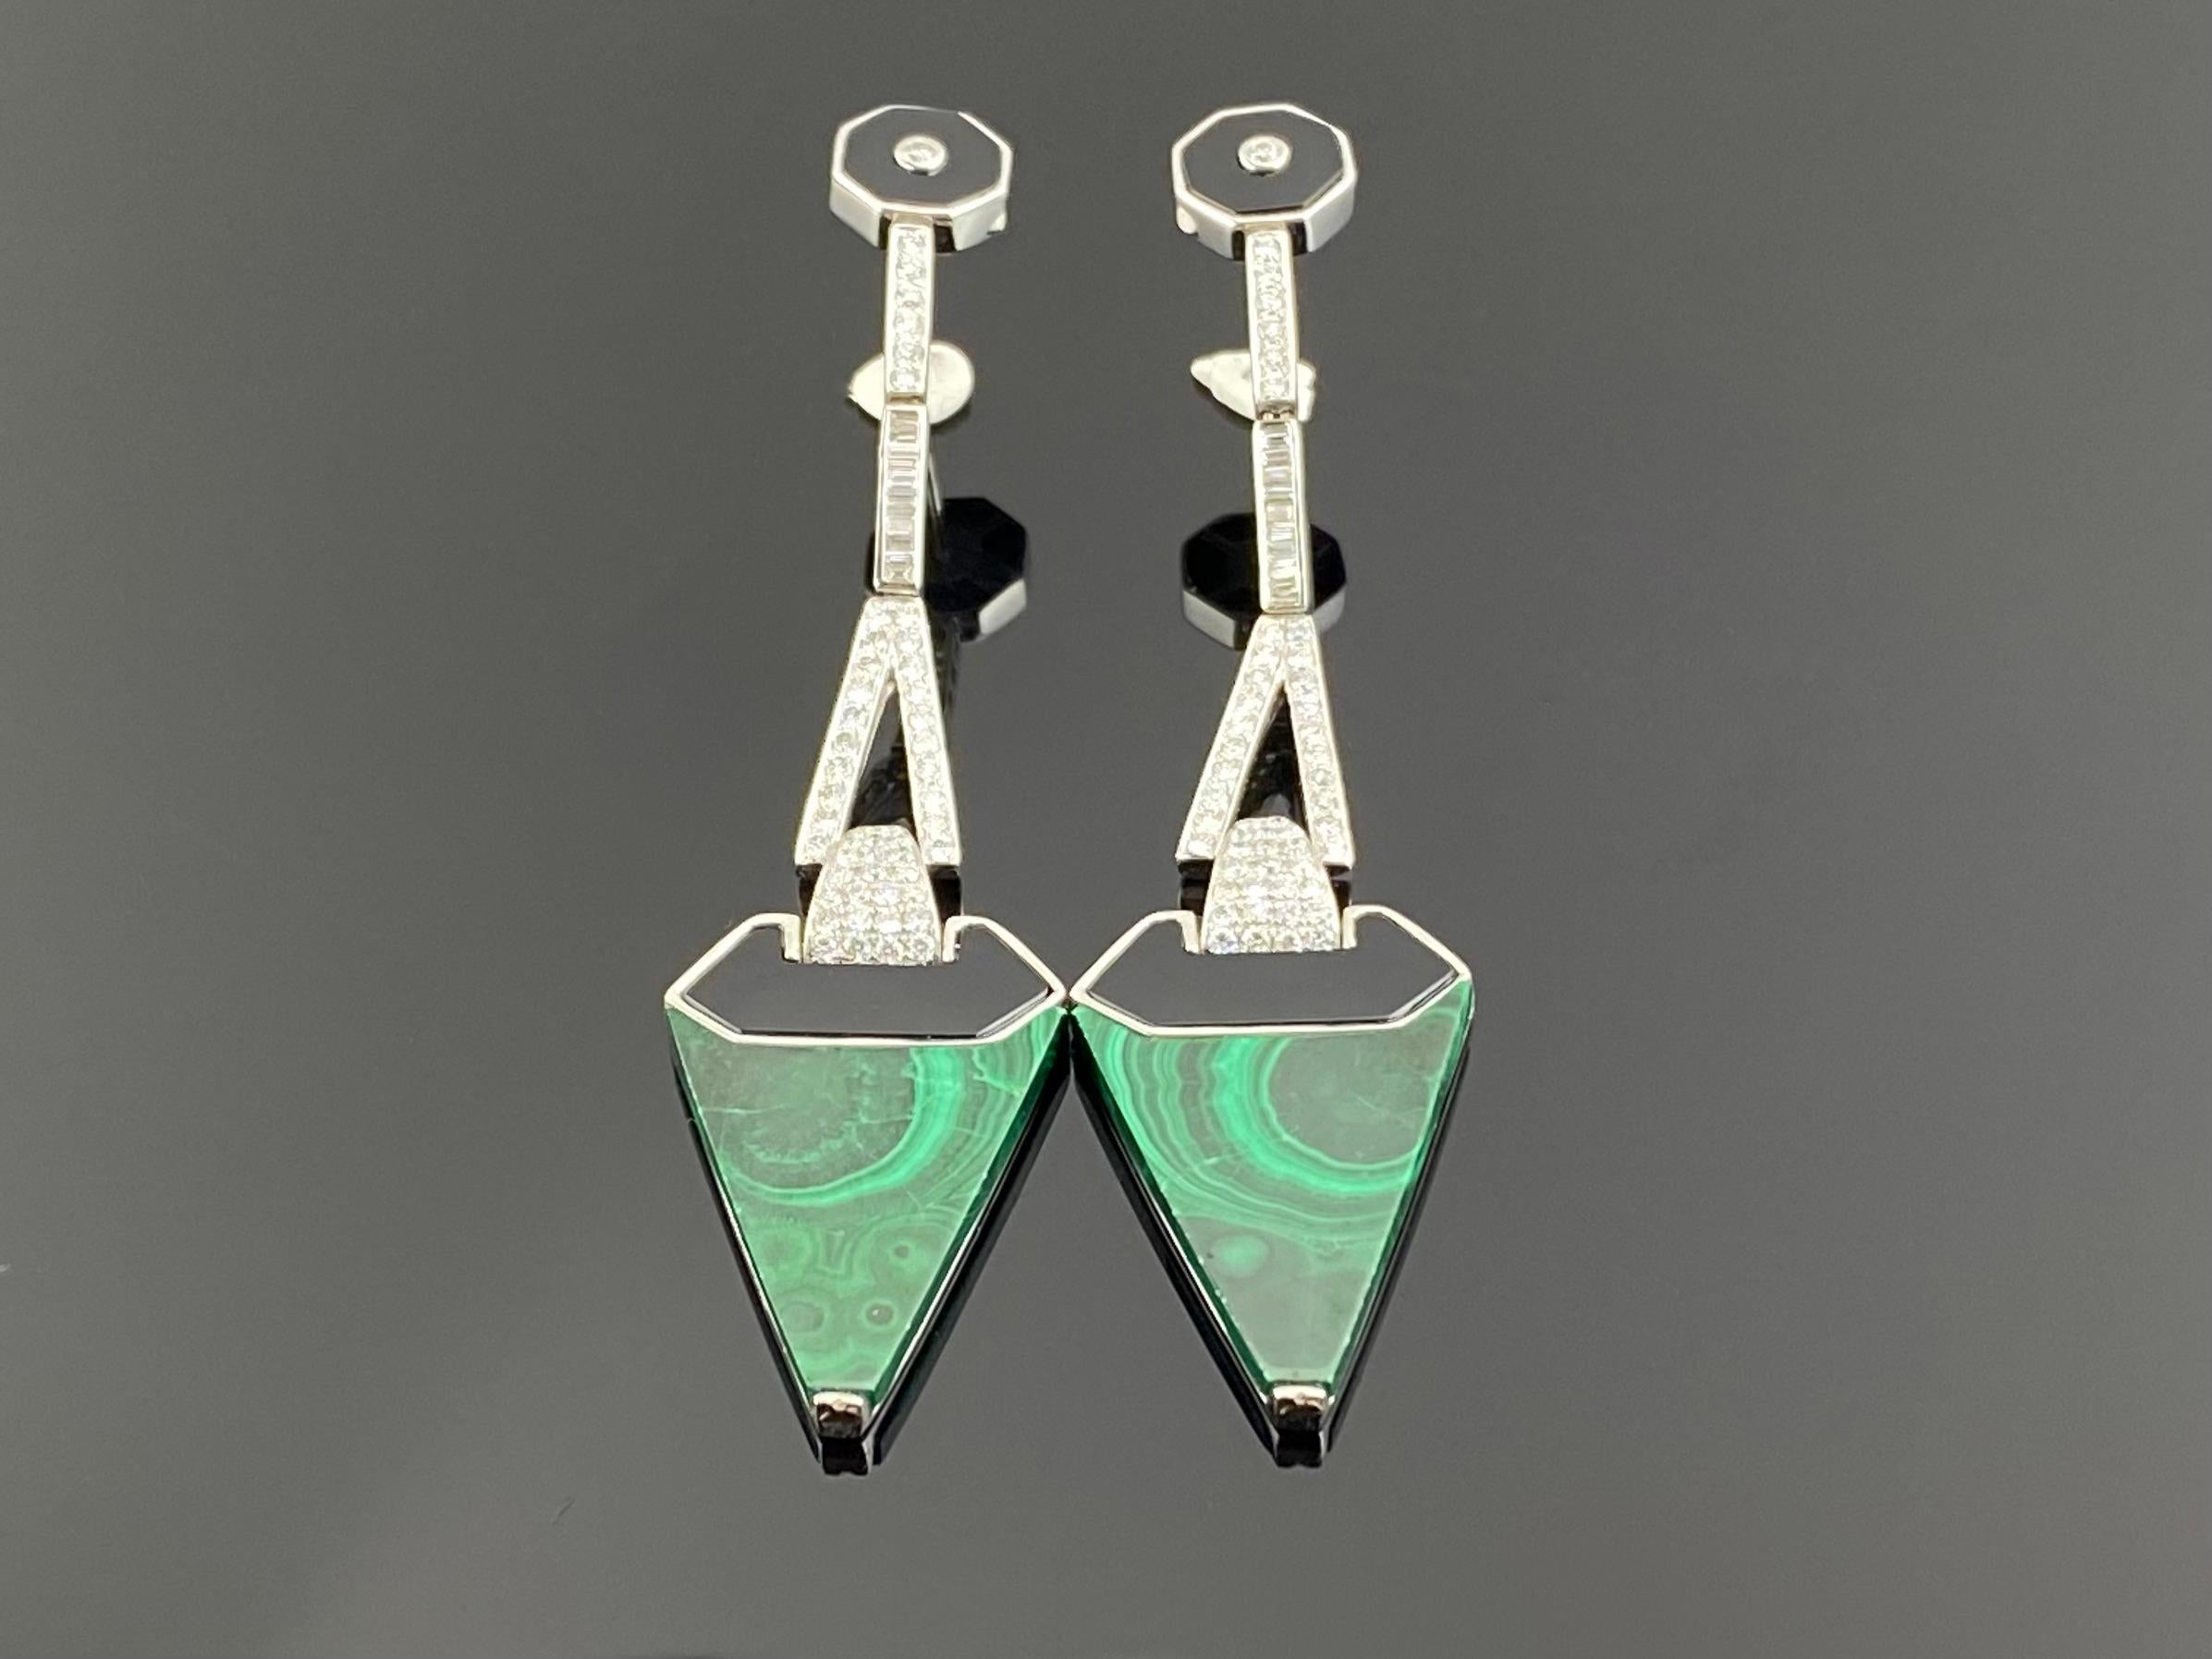 A beautiful pair of dangle earrings, with Malachite, Black onyx, 1.43 carat baguette and round cut Diamonds all set in solid 18K white gold. The earrings are around 8cm long, and comes with a push pull backing. 
We provide free shipping, and accept